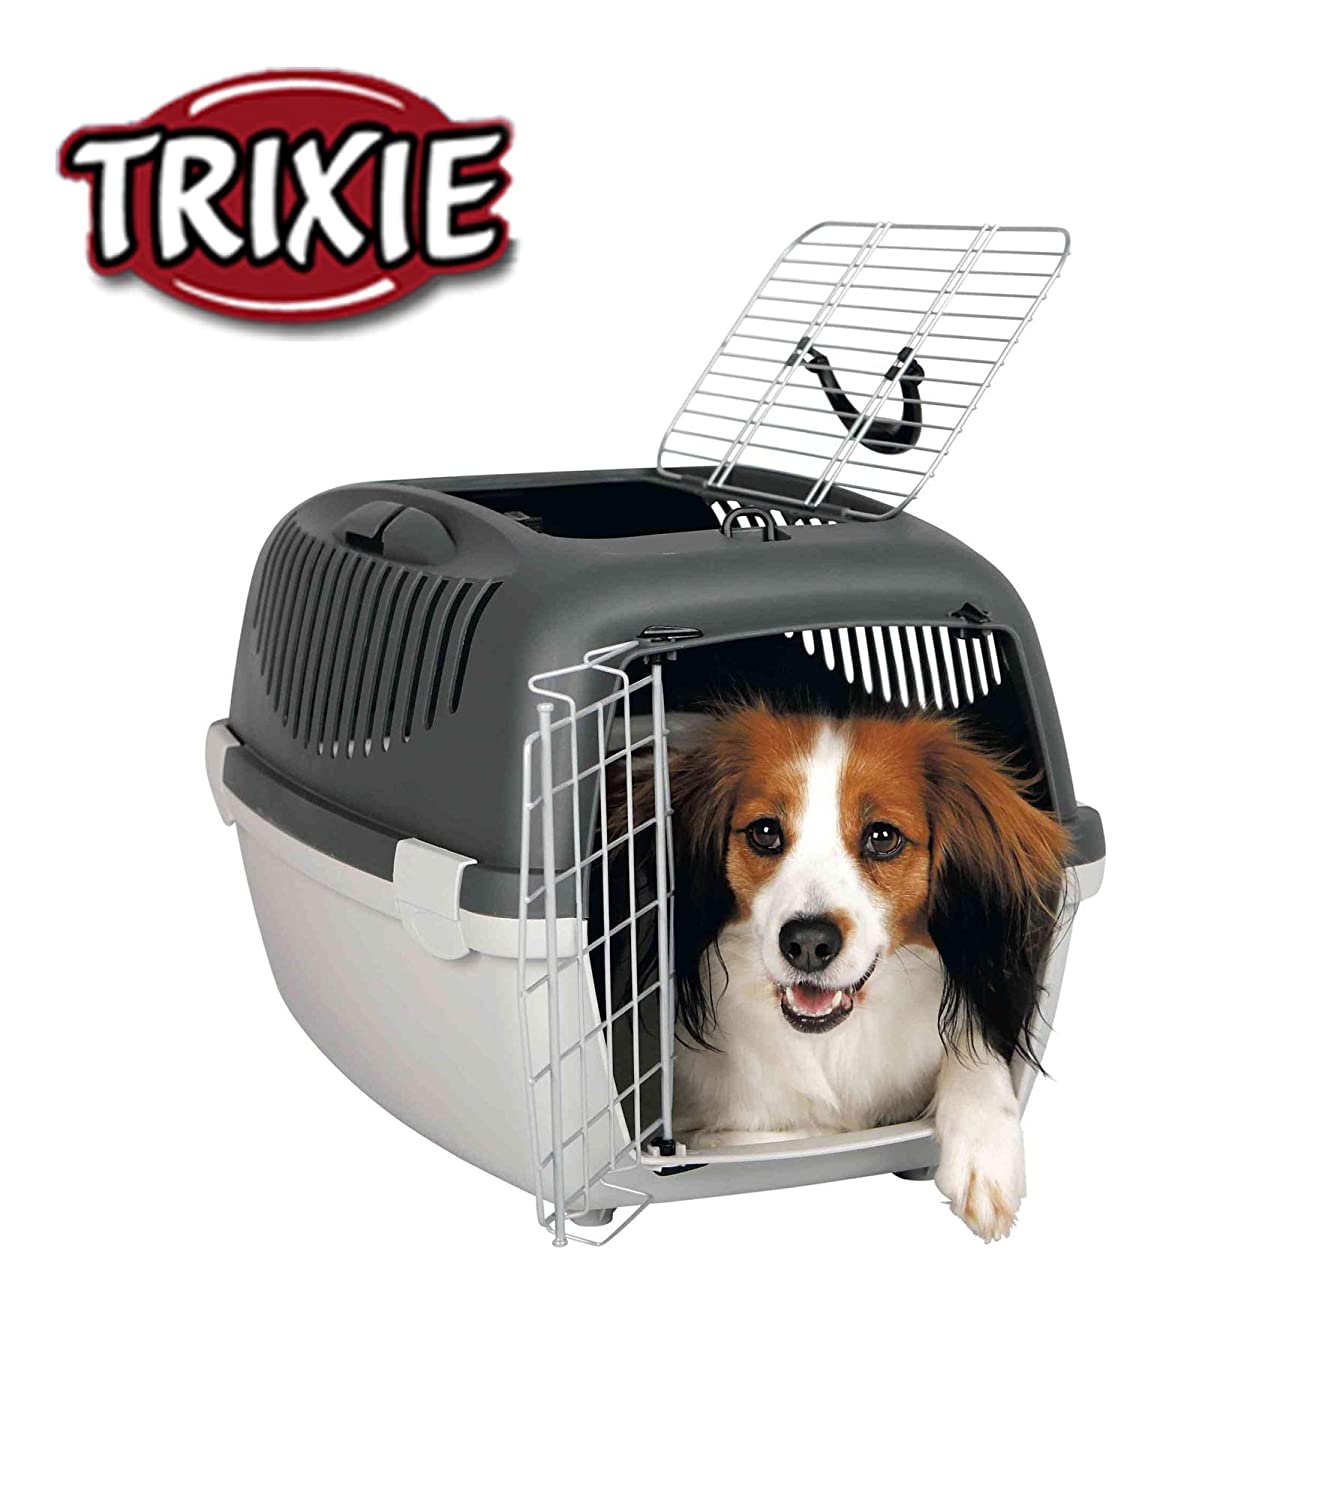 Trixie Capri 3 Open Top Pets Carrier - Holds up to 12 kg